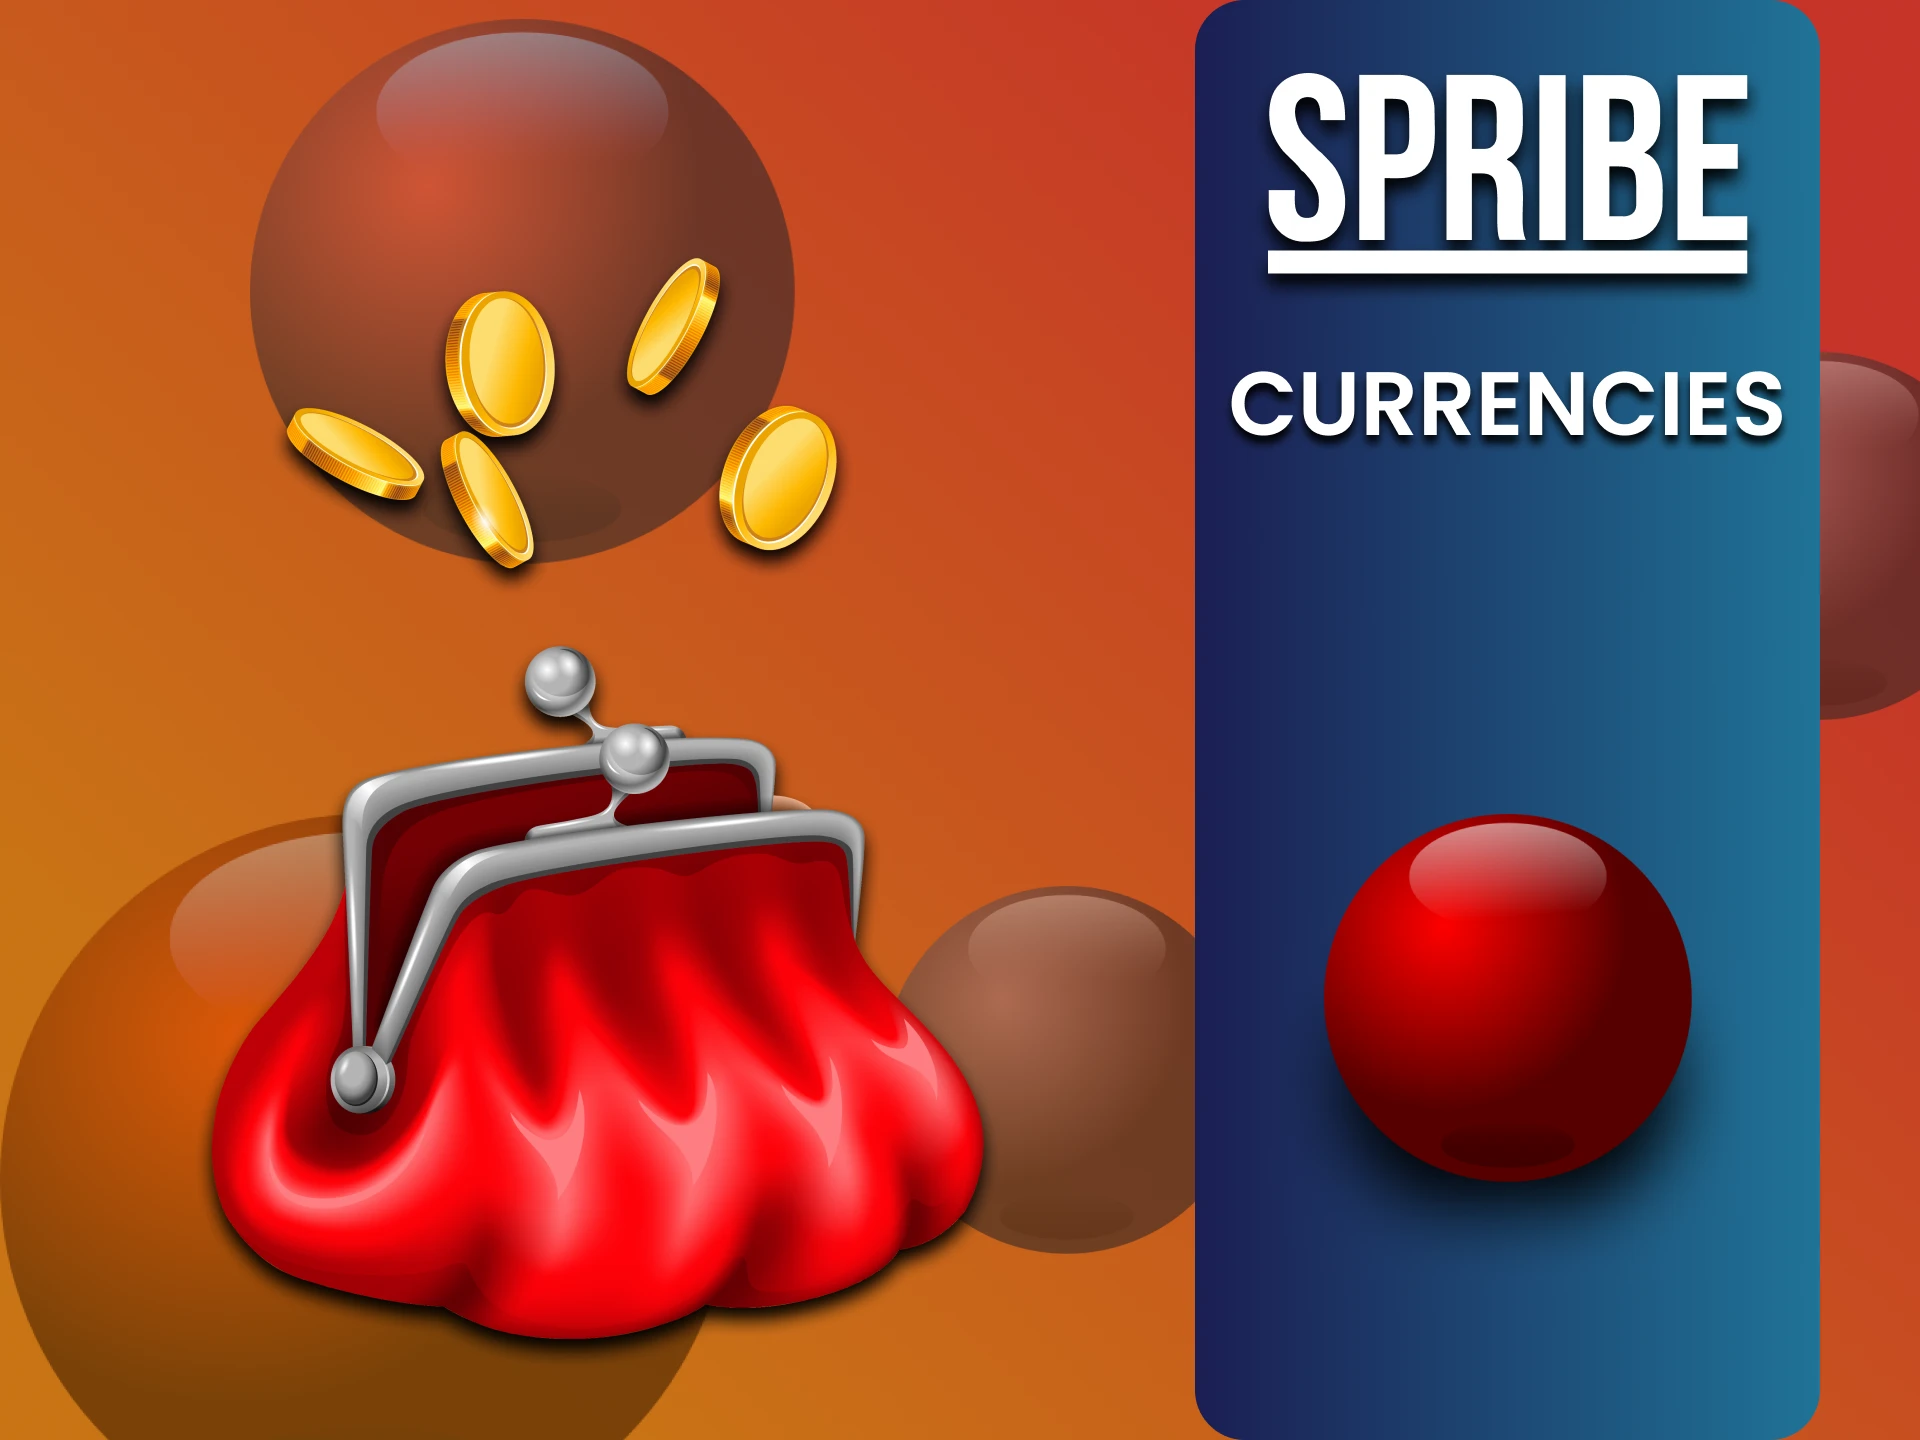 We will tell you what currencies Spribe uses.